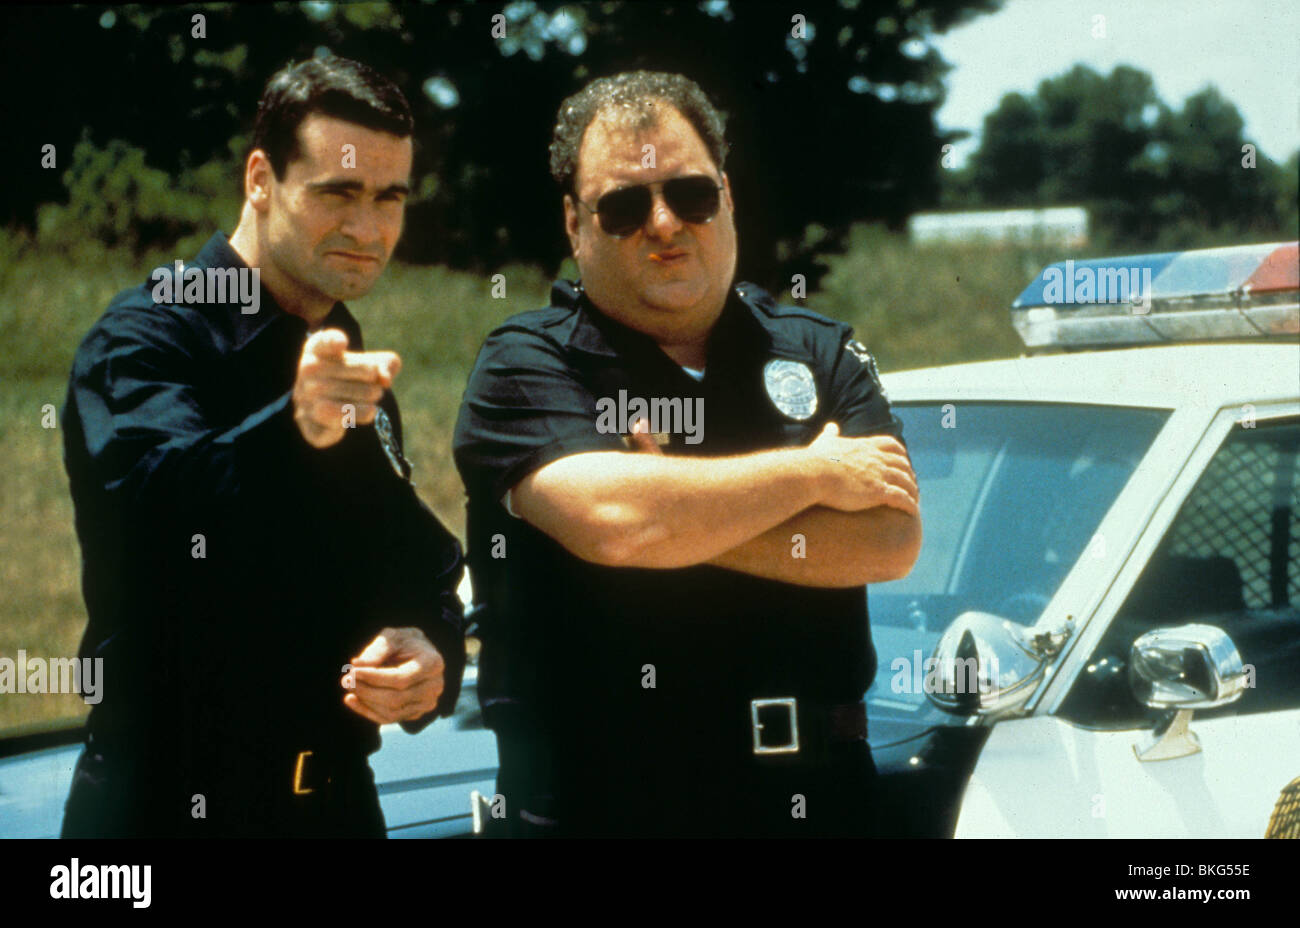 THE CHASE (1994) HENRY ROLLINS, JOSH MOSTEL CHAS 014 Stock Photo